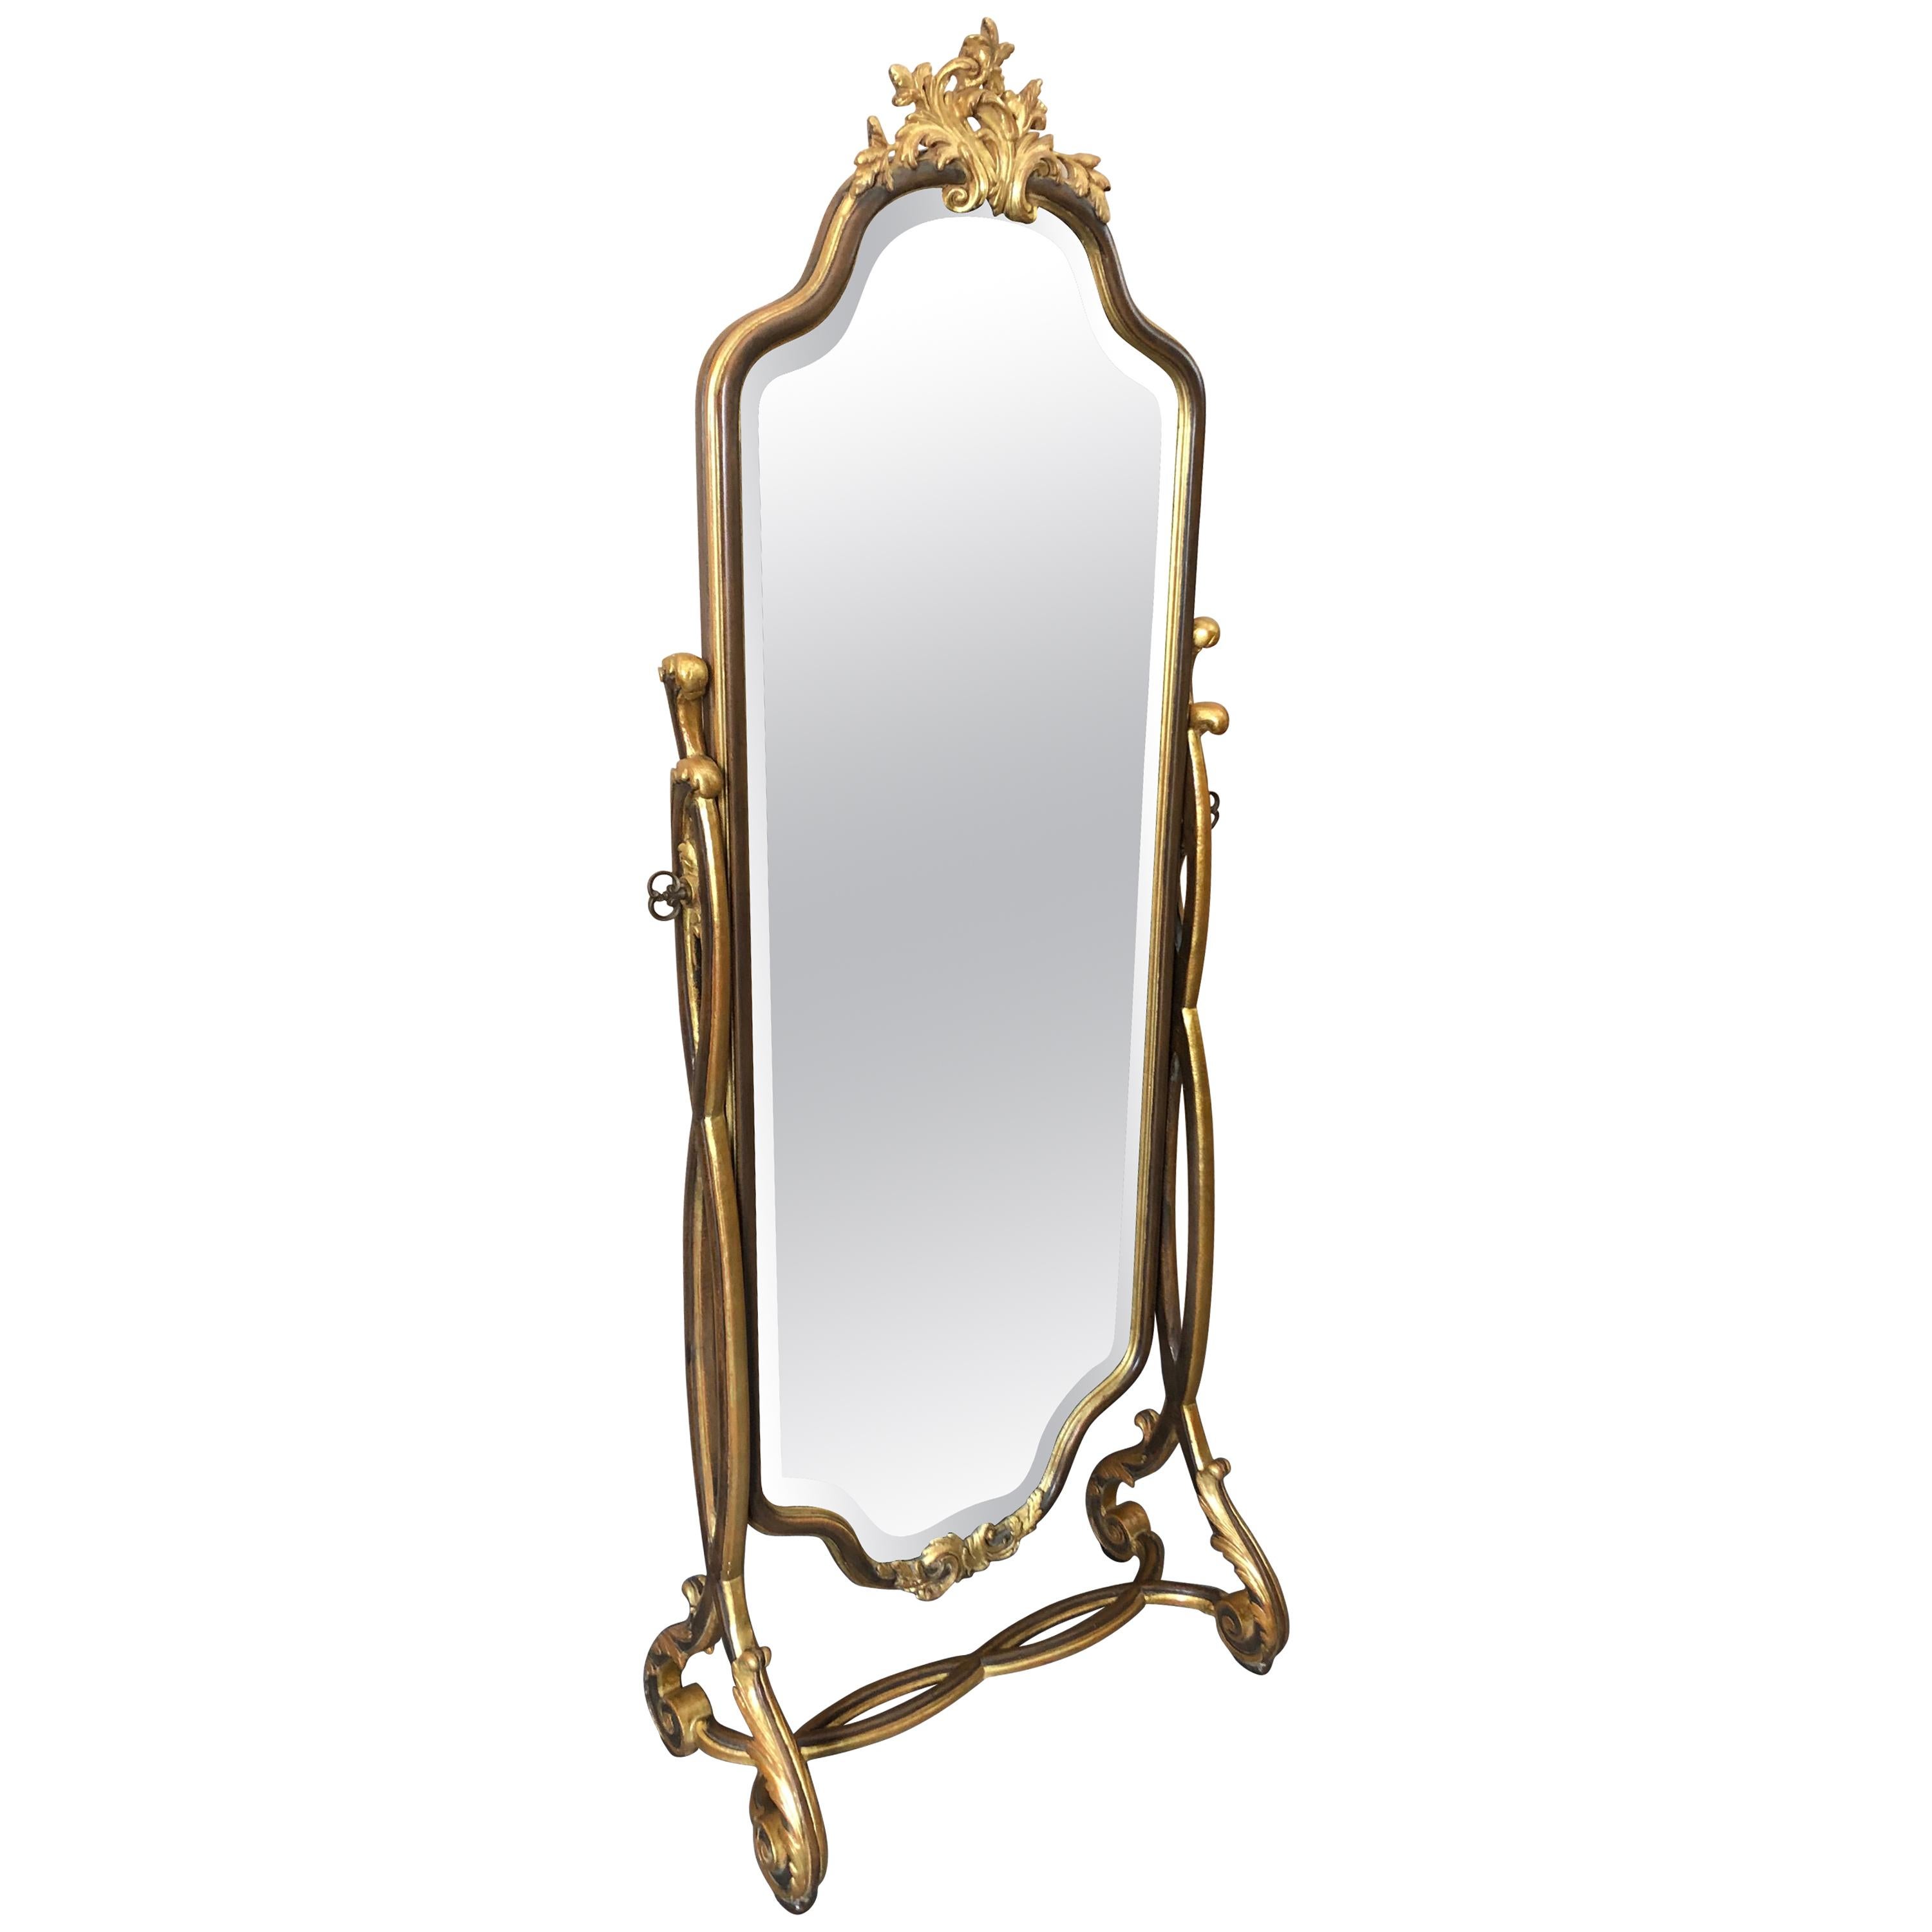 Very Pretty French Style Gilt Decorated Standing Cheval Dressing Mirror